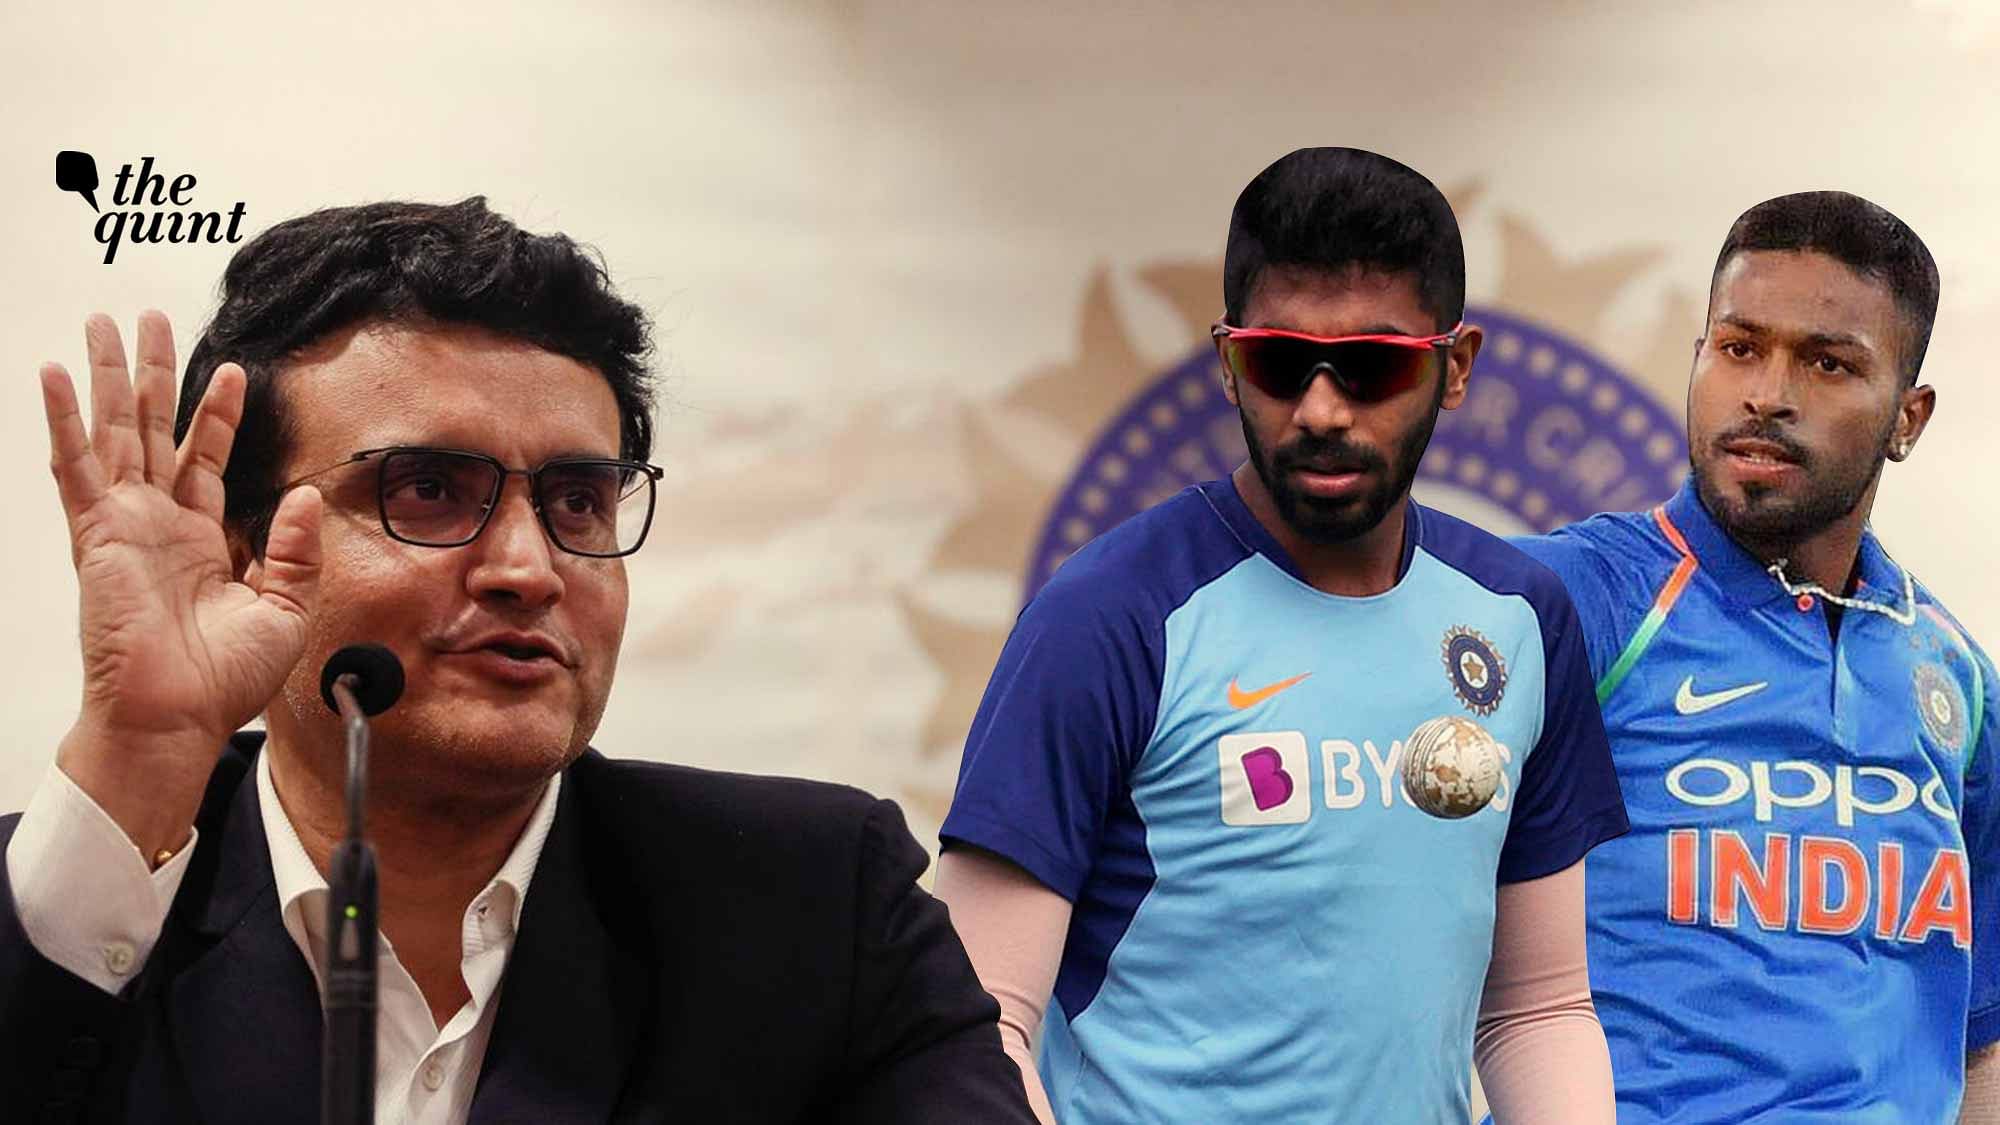 Has the ‘superstar culture’ returned in the BCCI? Why are Bumrah and Pandya refusing to train at the NCA and electing their own routes back?